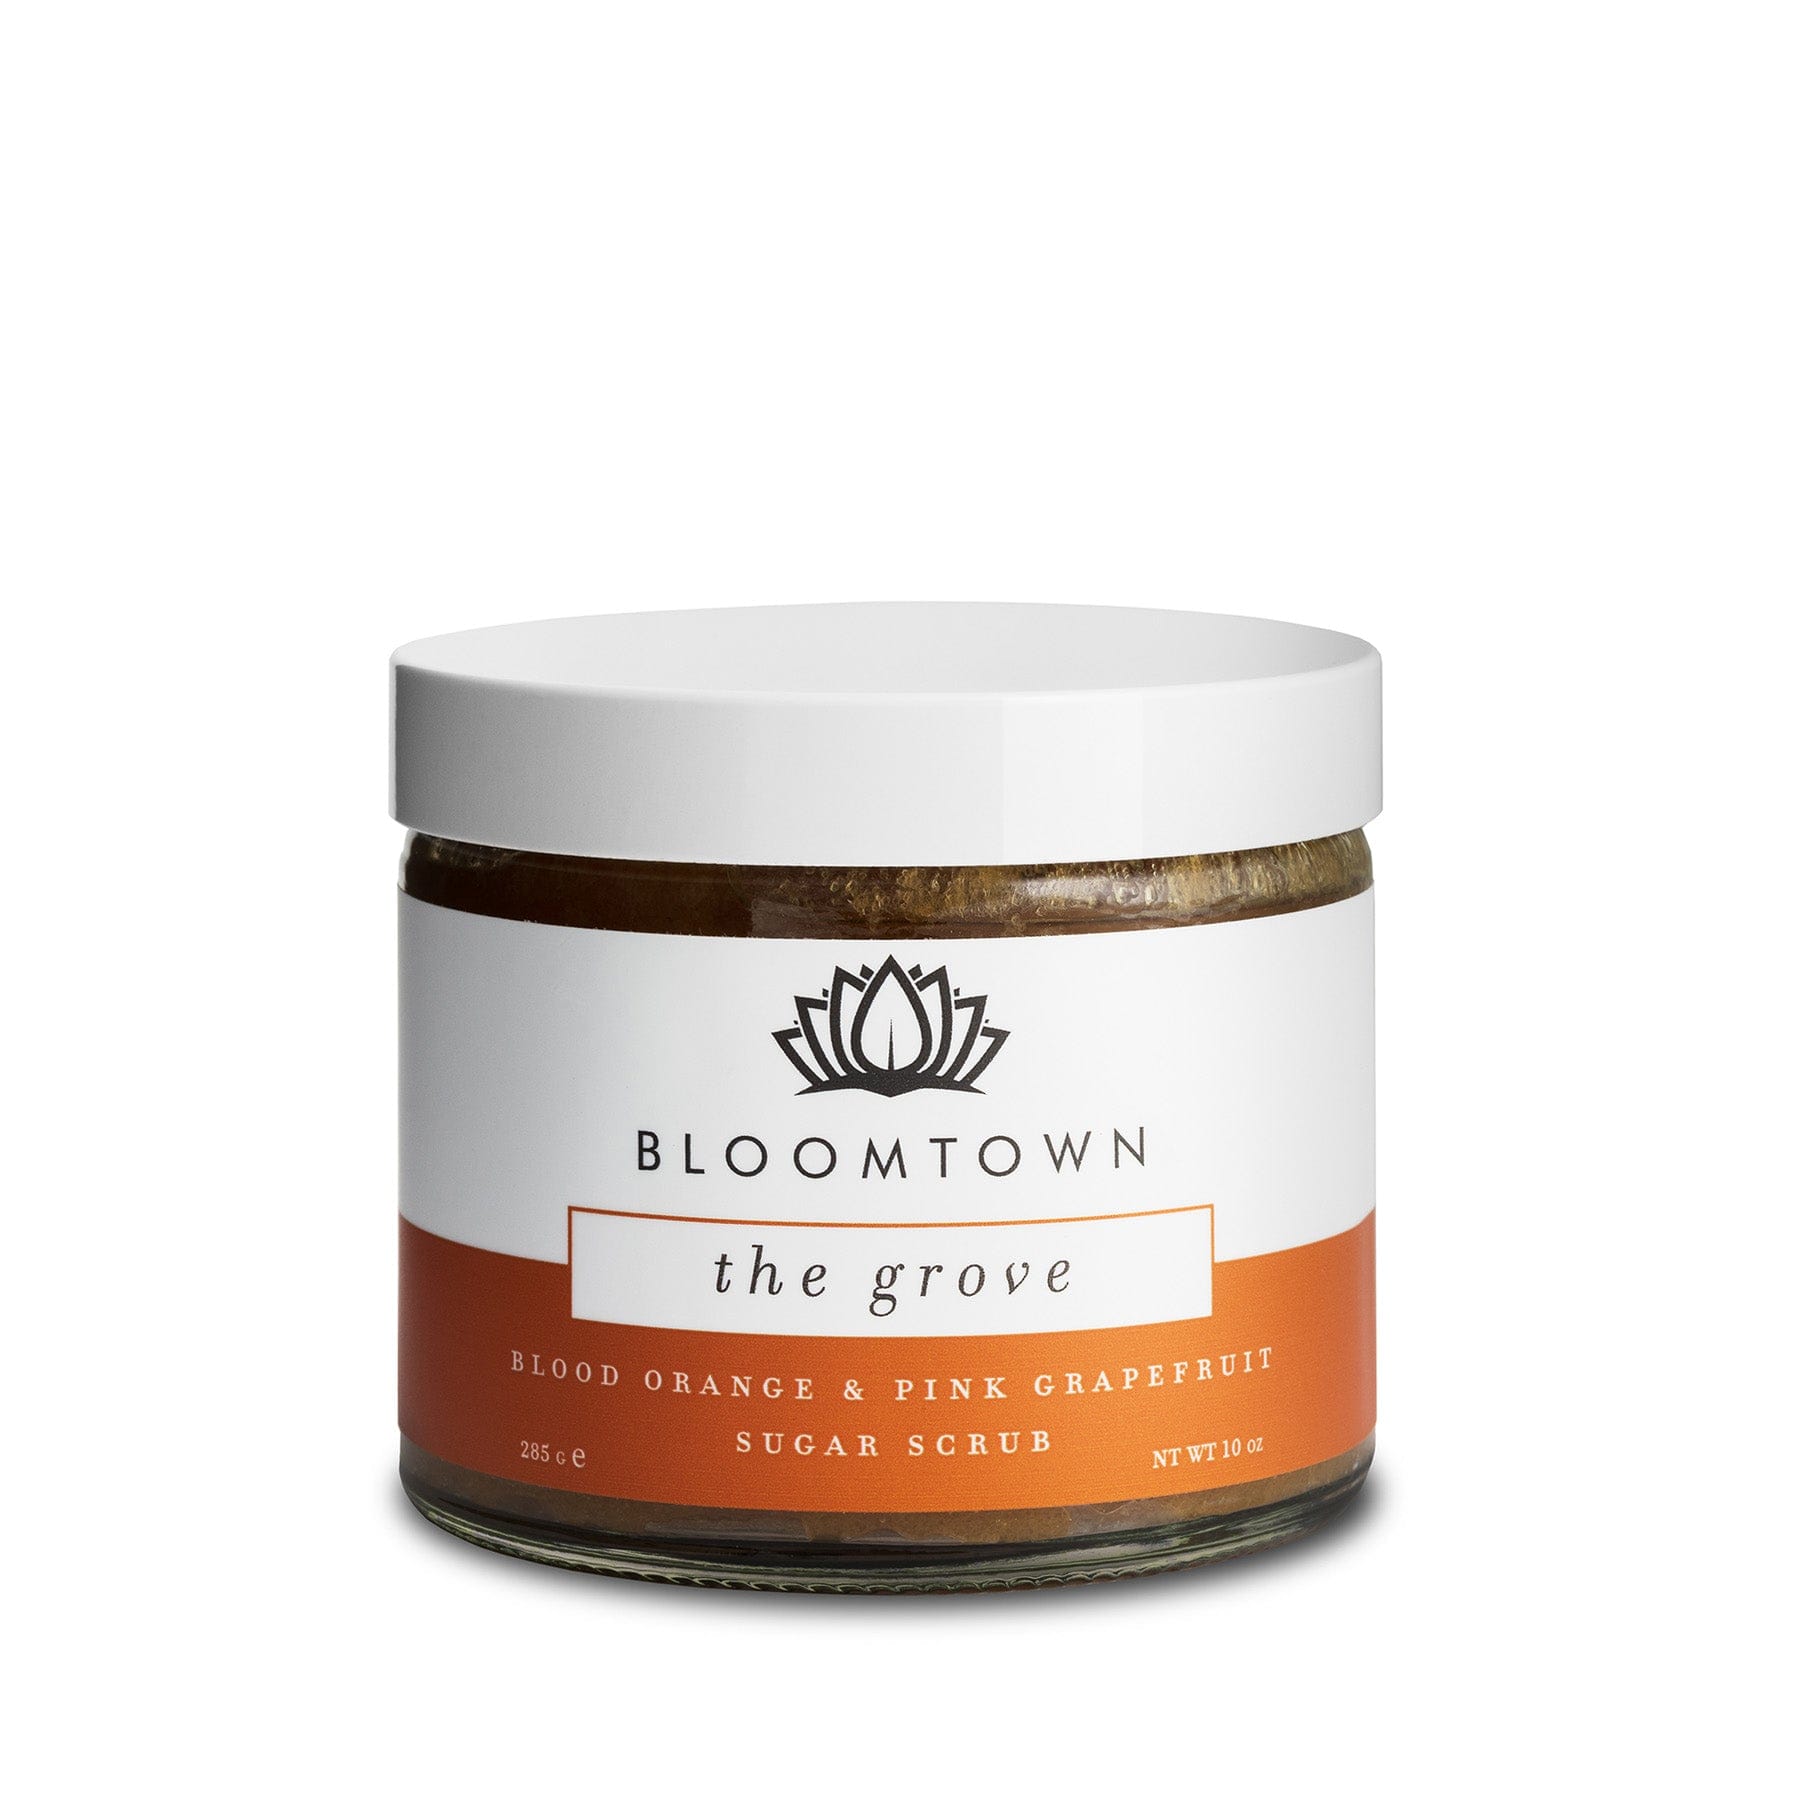 Bloomtown The Grove sugar scrub jar with blood orange and pink grapefruit on white background